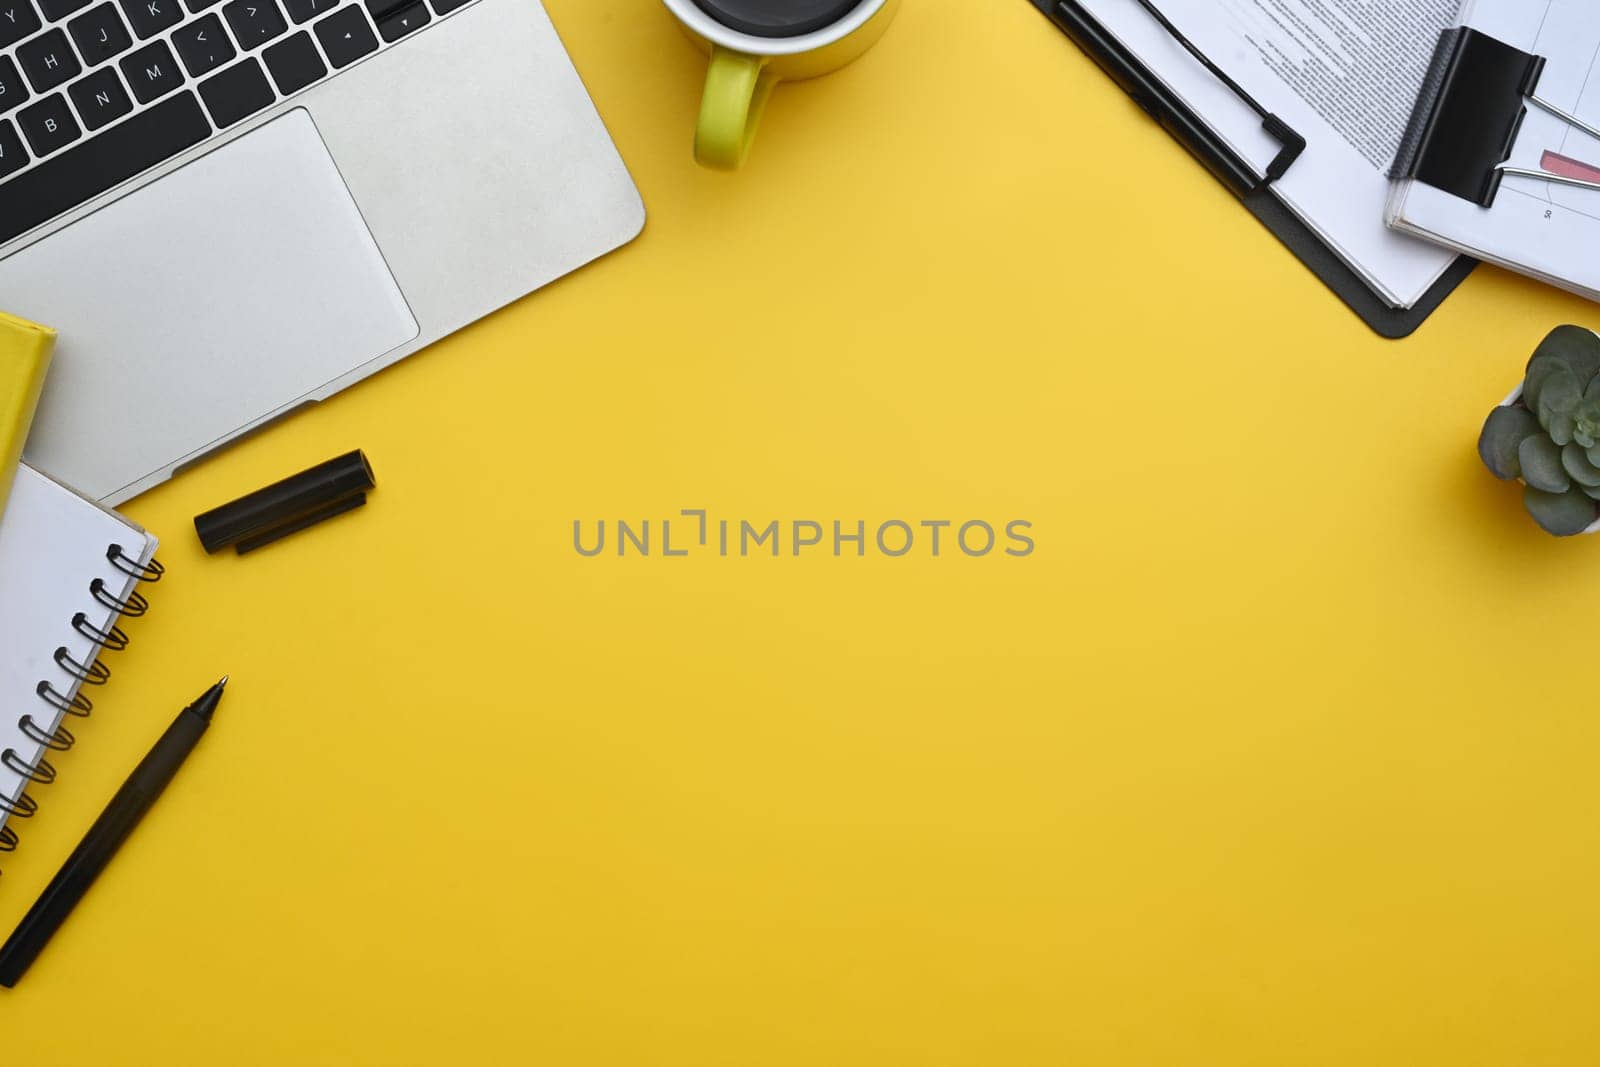 Laptop, notepad, coffee cup and financial reports on yellow background. Top view with copy space.